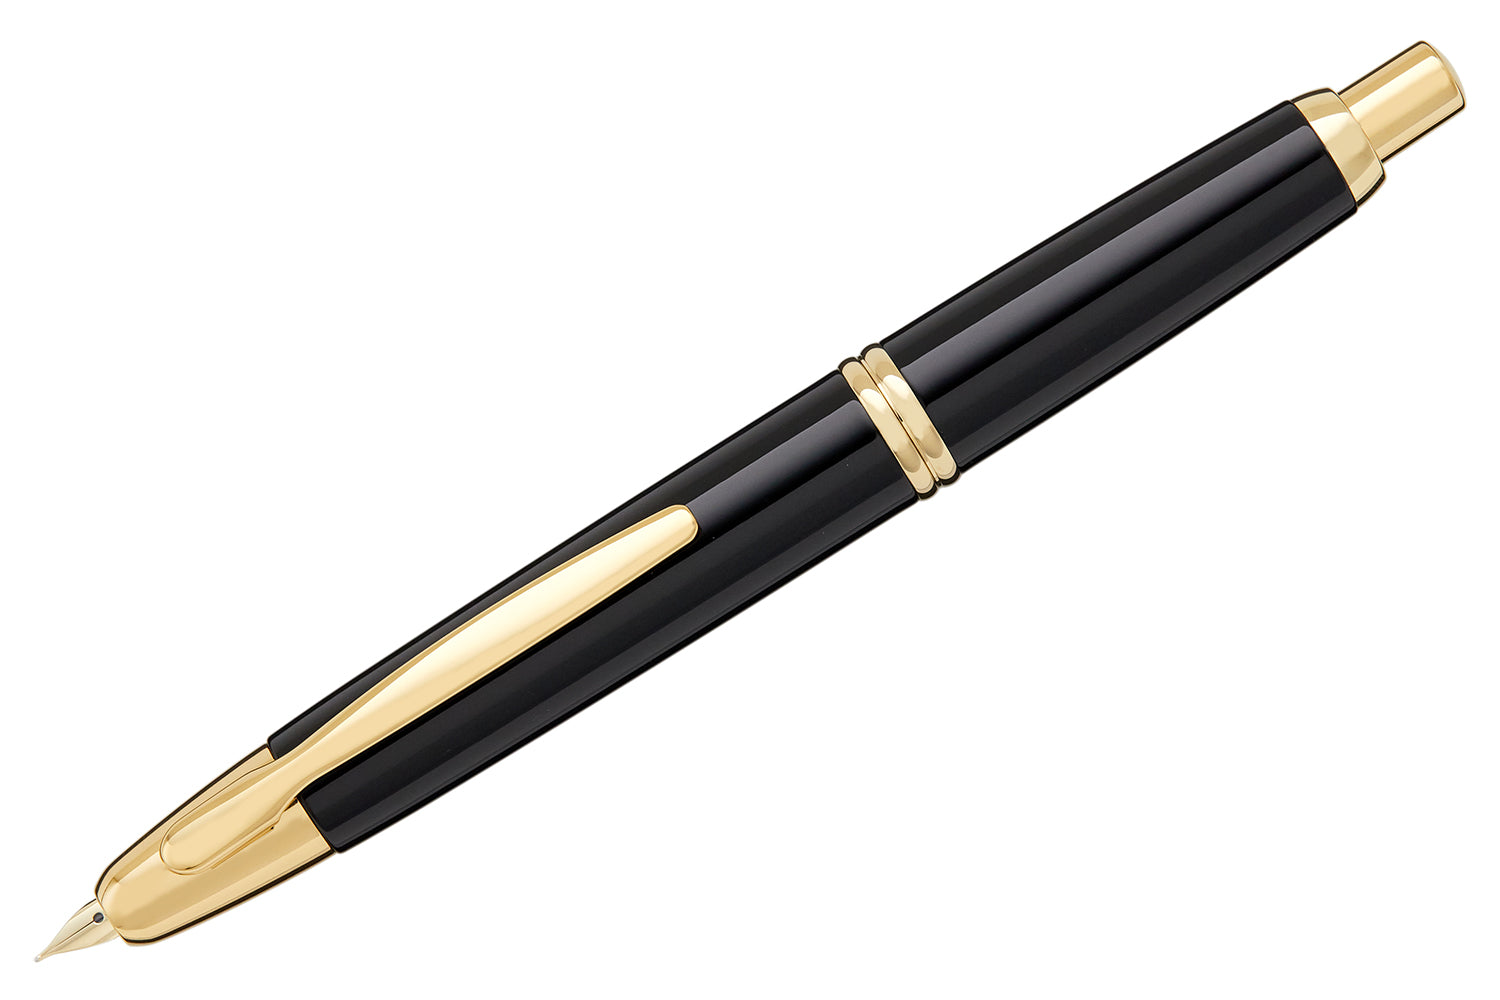 Shop Pilot Vanishing Point Fountain Pen with great discounts and